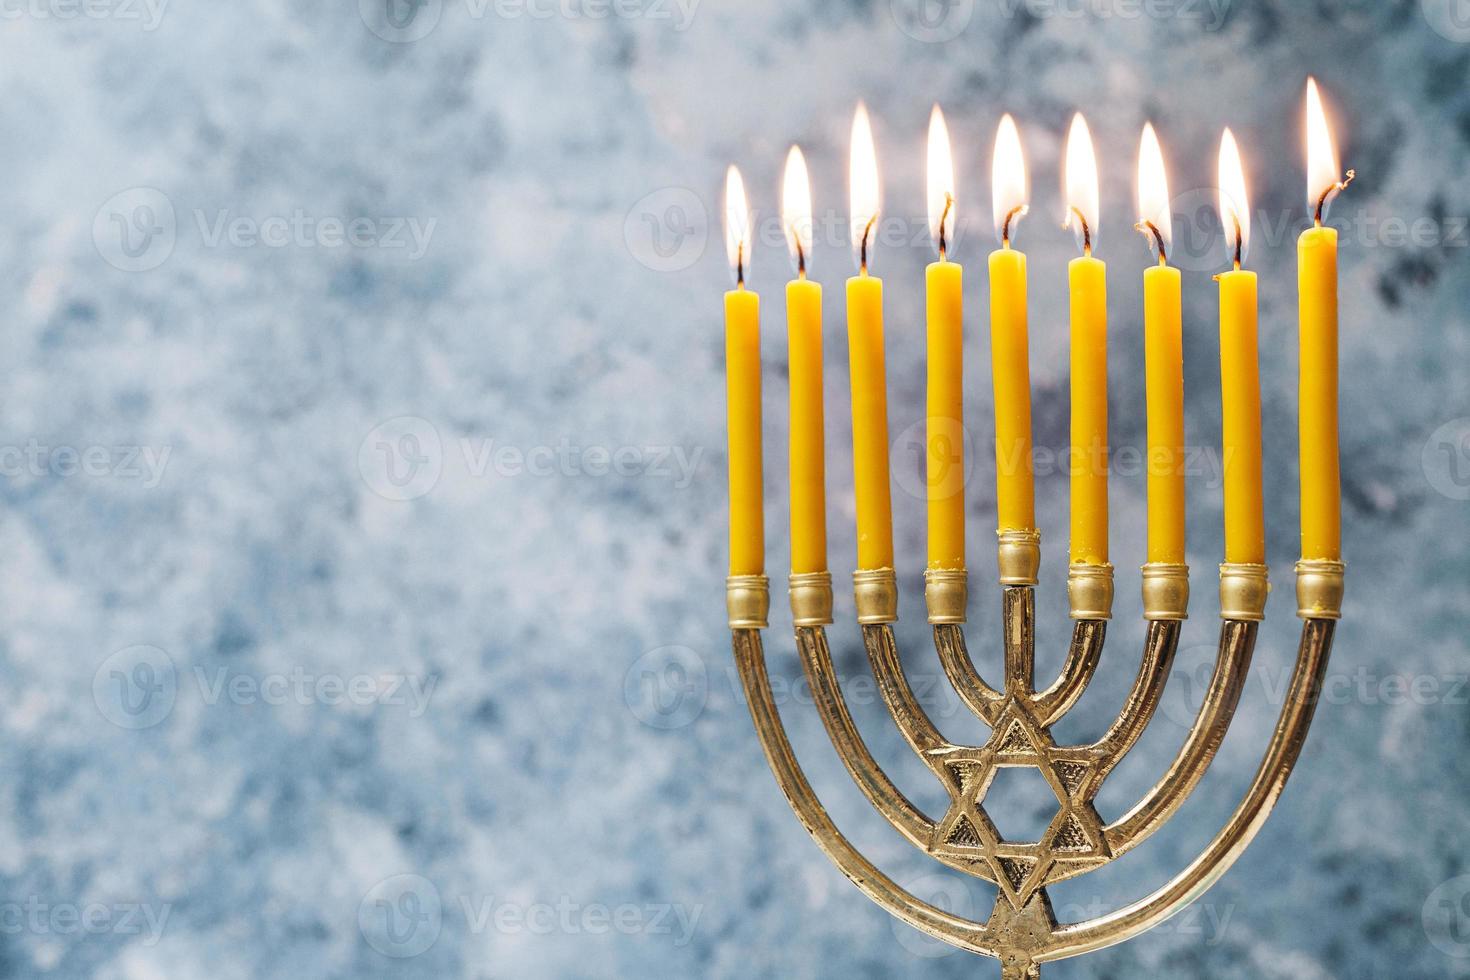 traditional jewish candlestick holder. High quality and resolution beautiful photo concept